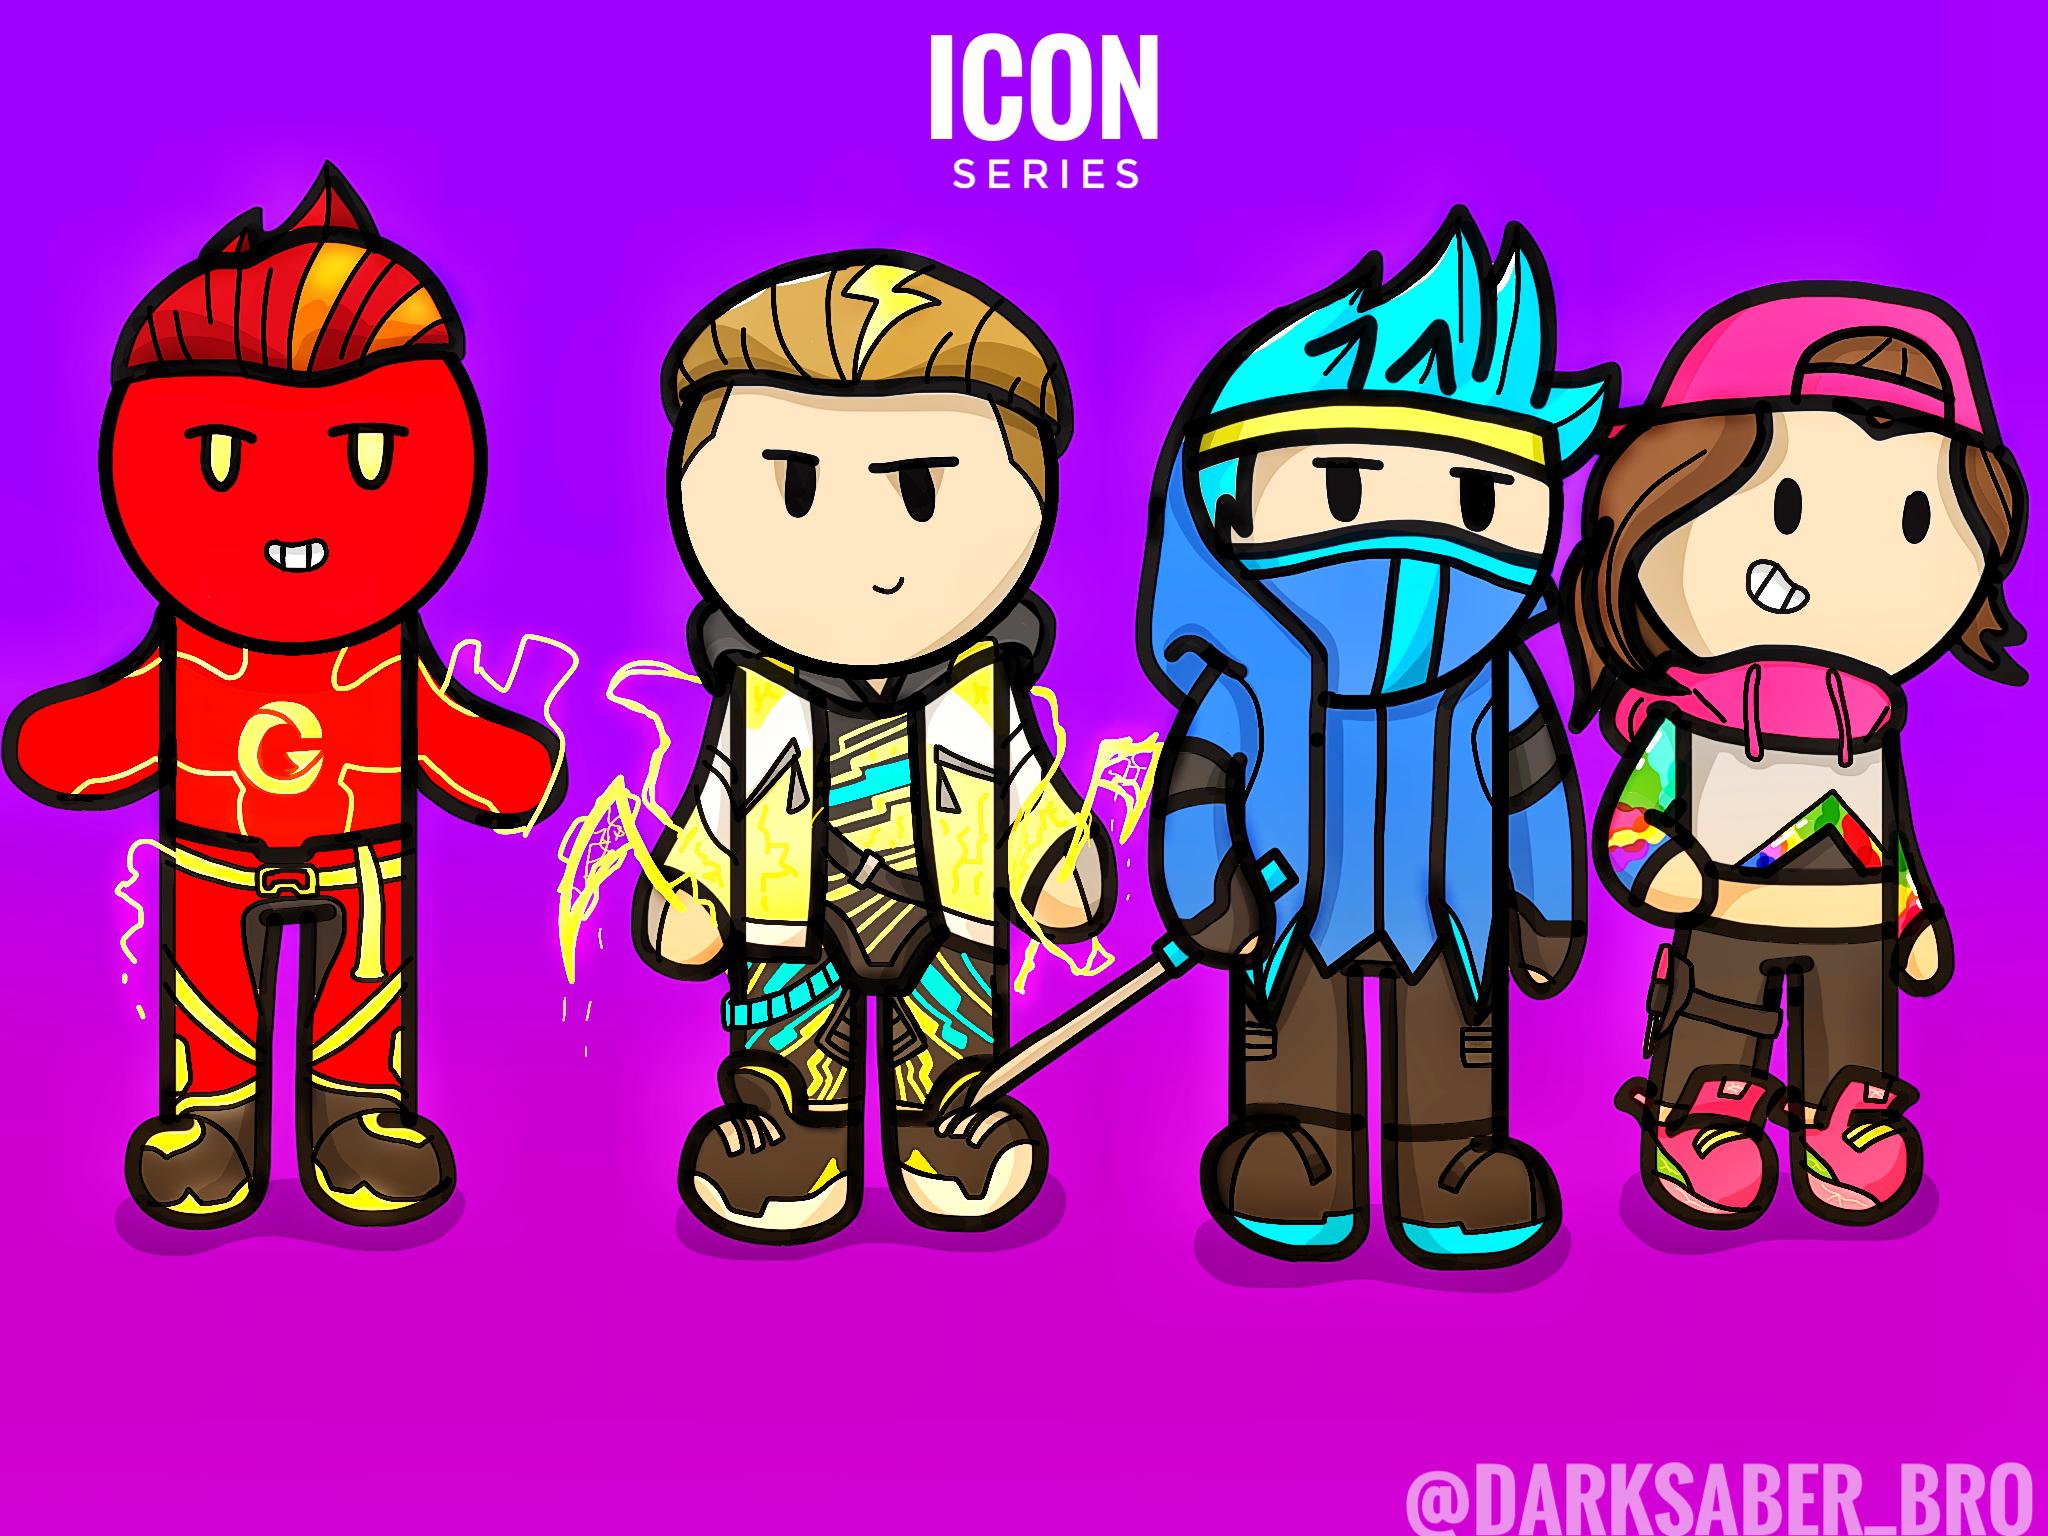 Since the ICON Series just received a new member, I decided to draw something!